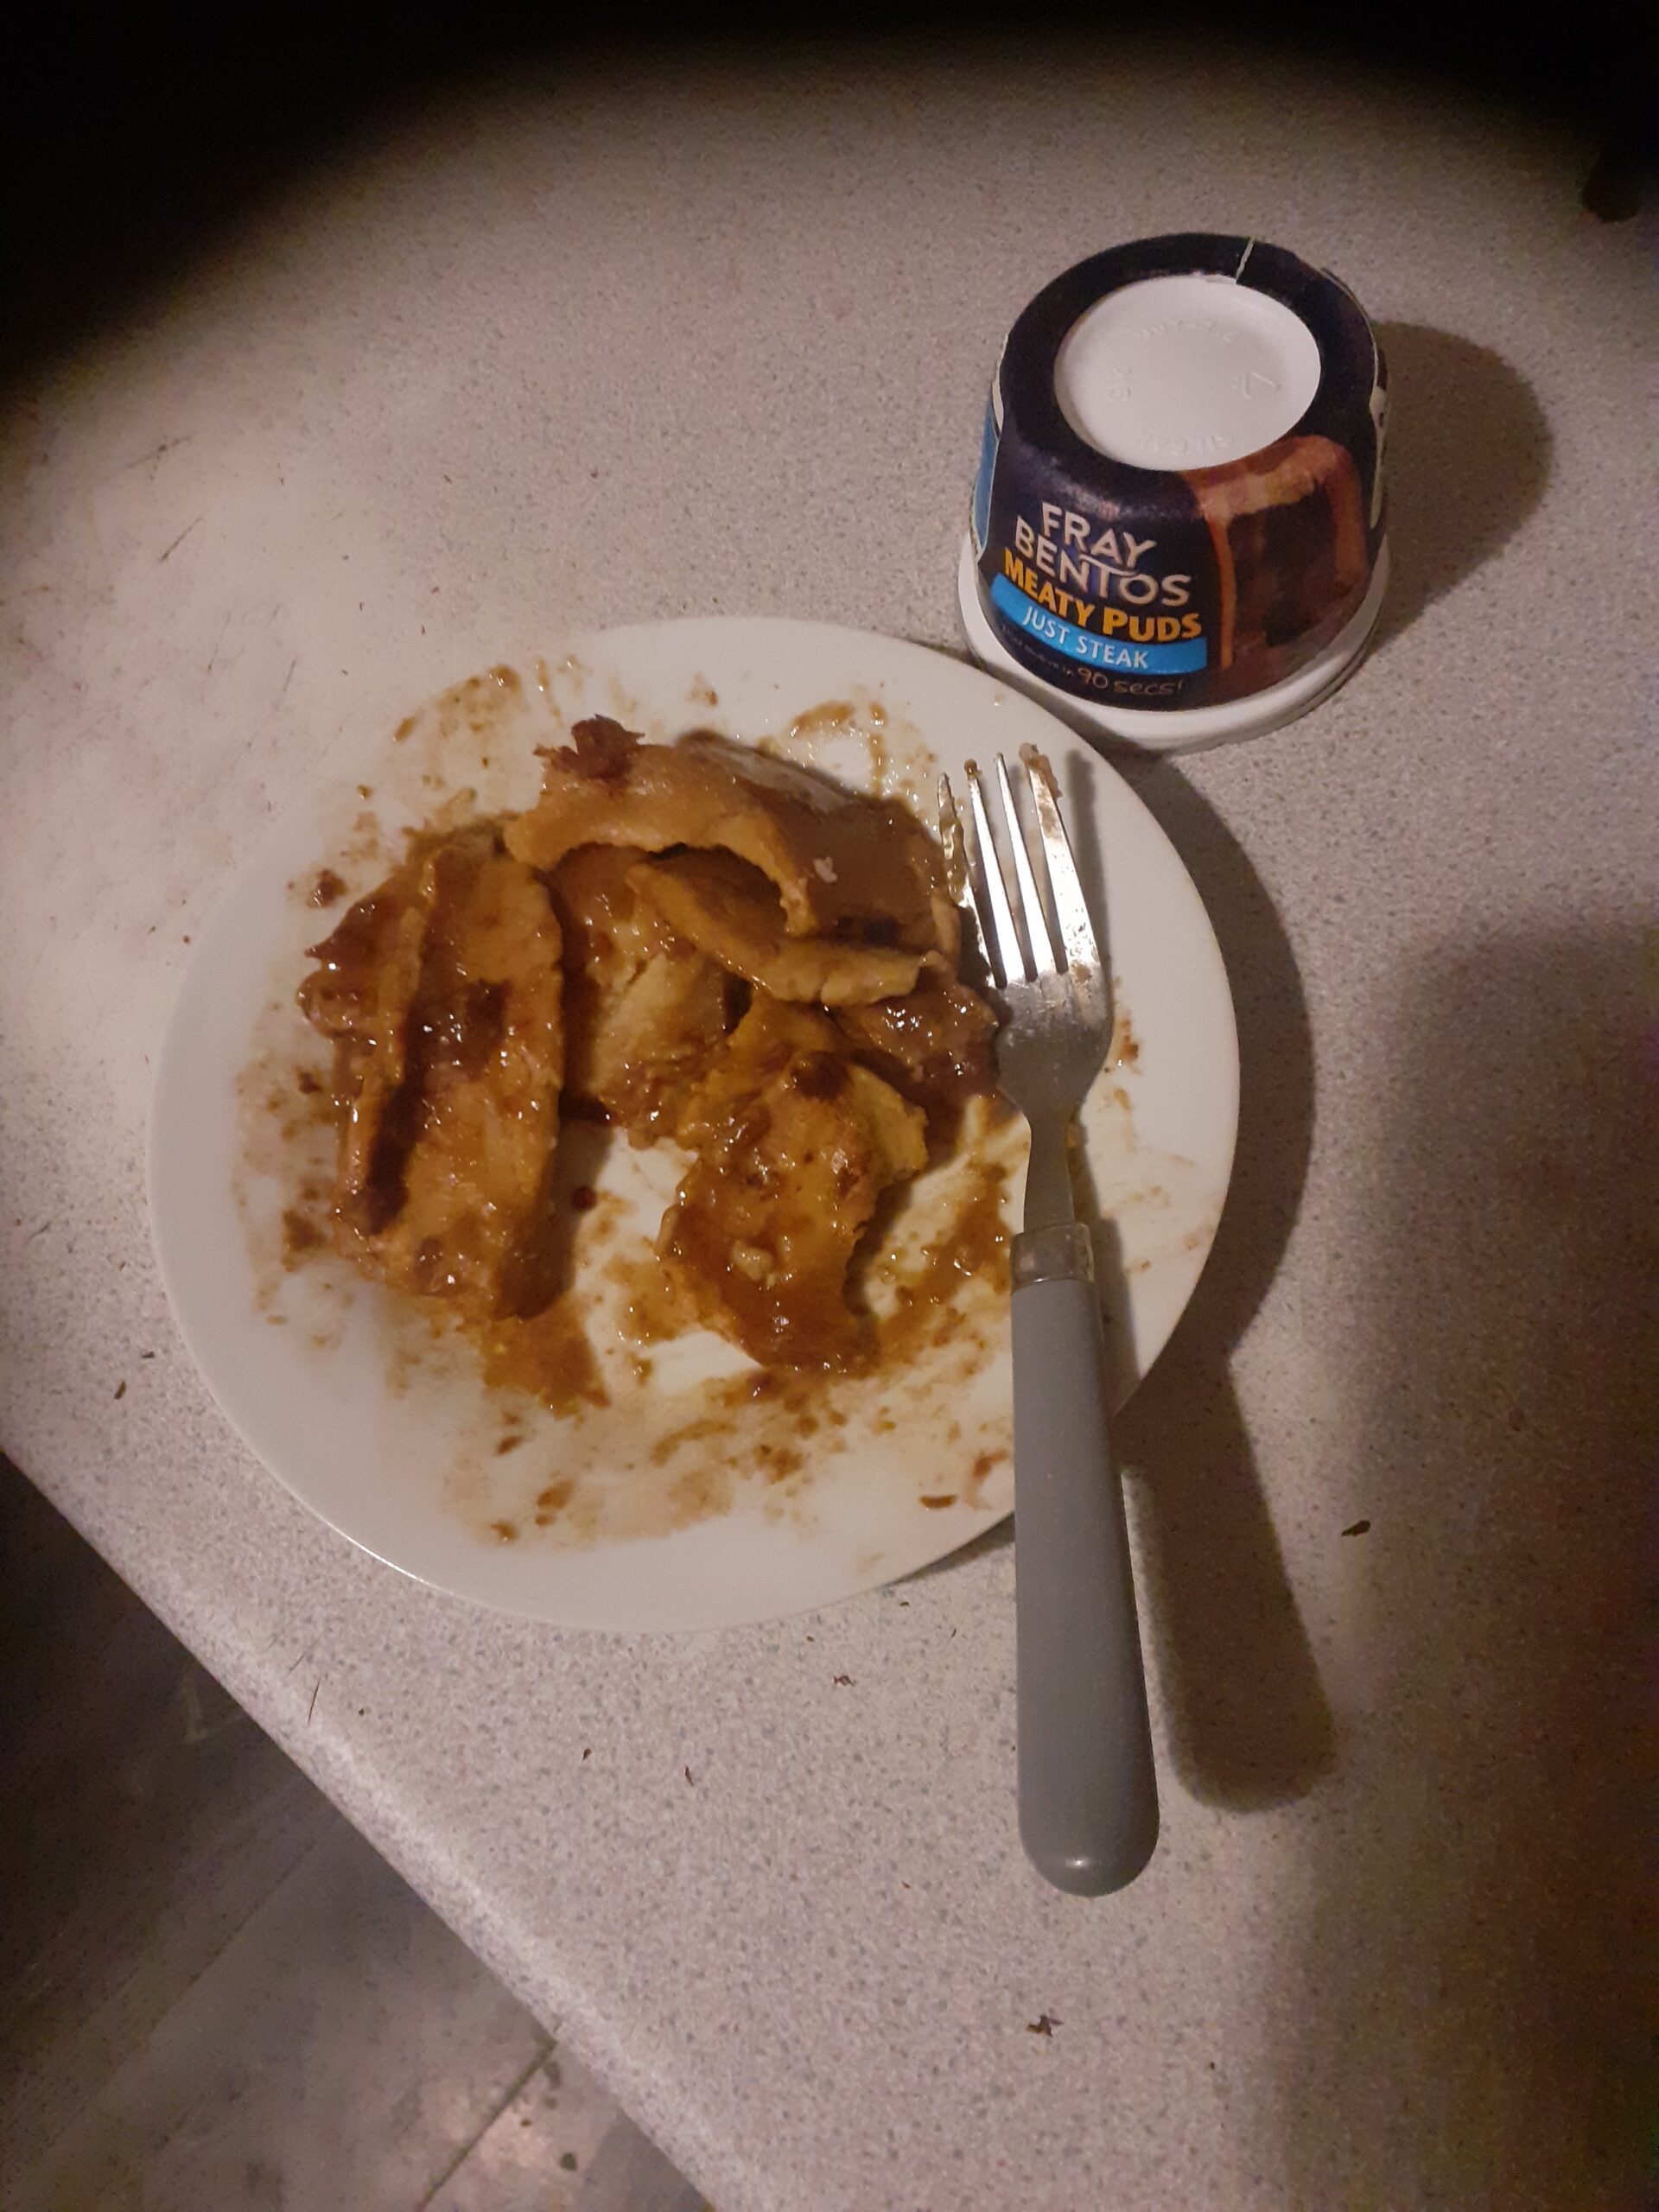 Fray Bentos complaint Not so meaty puds